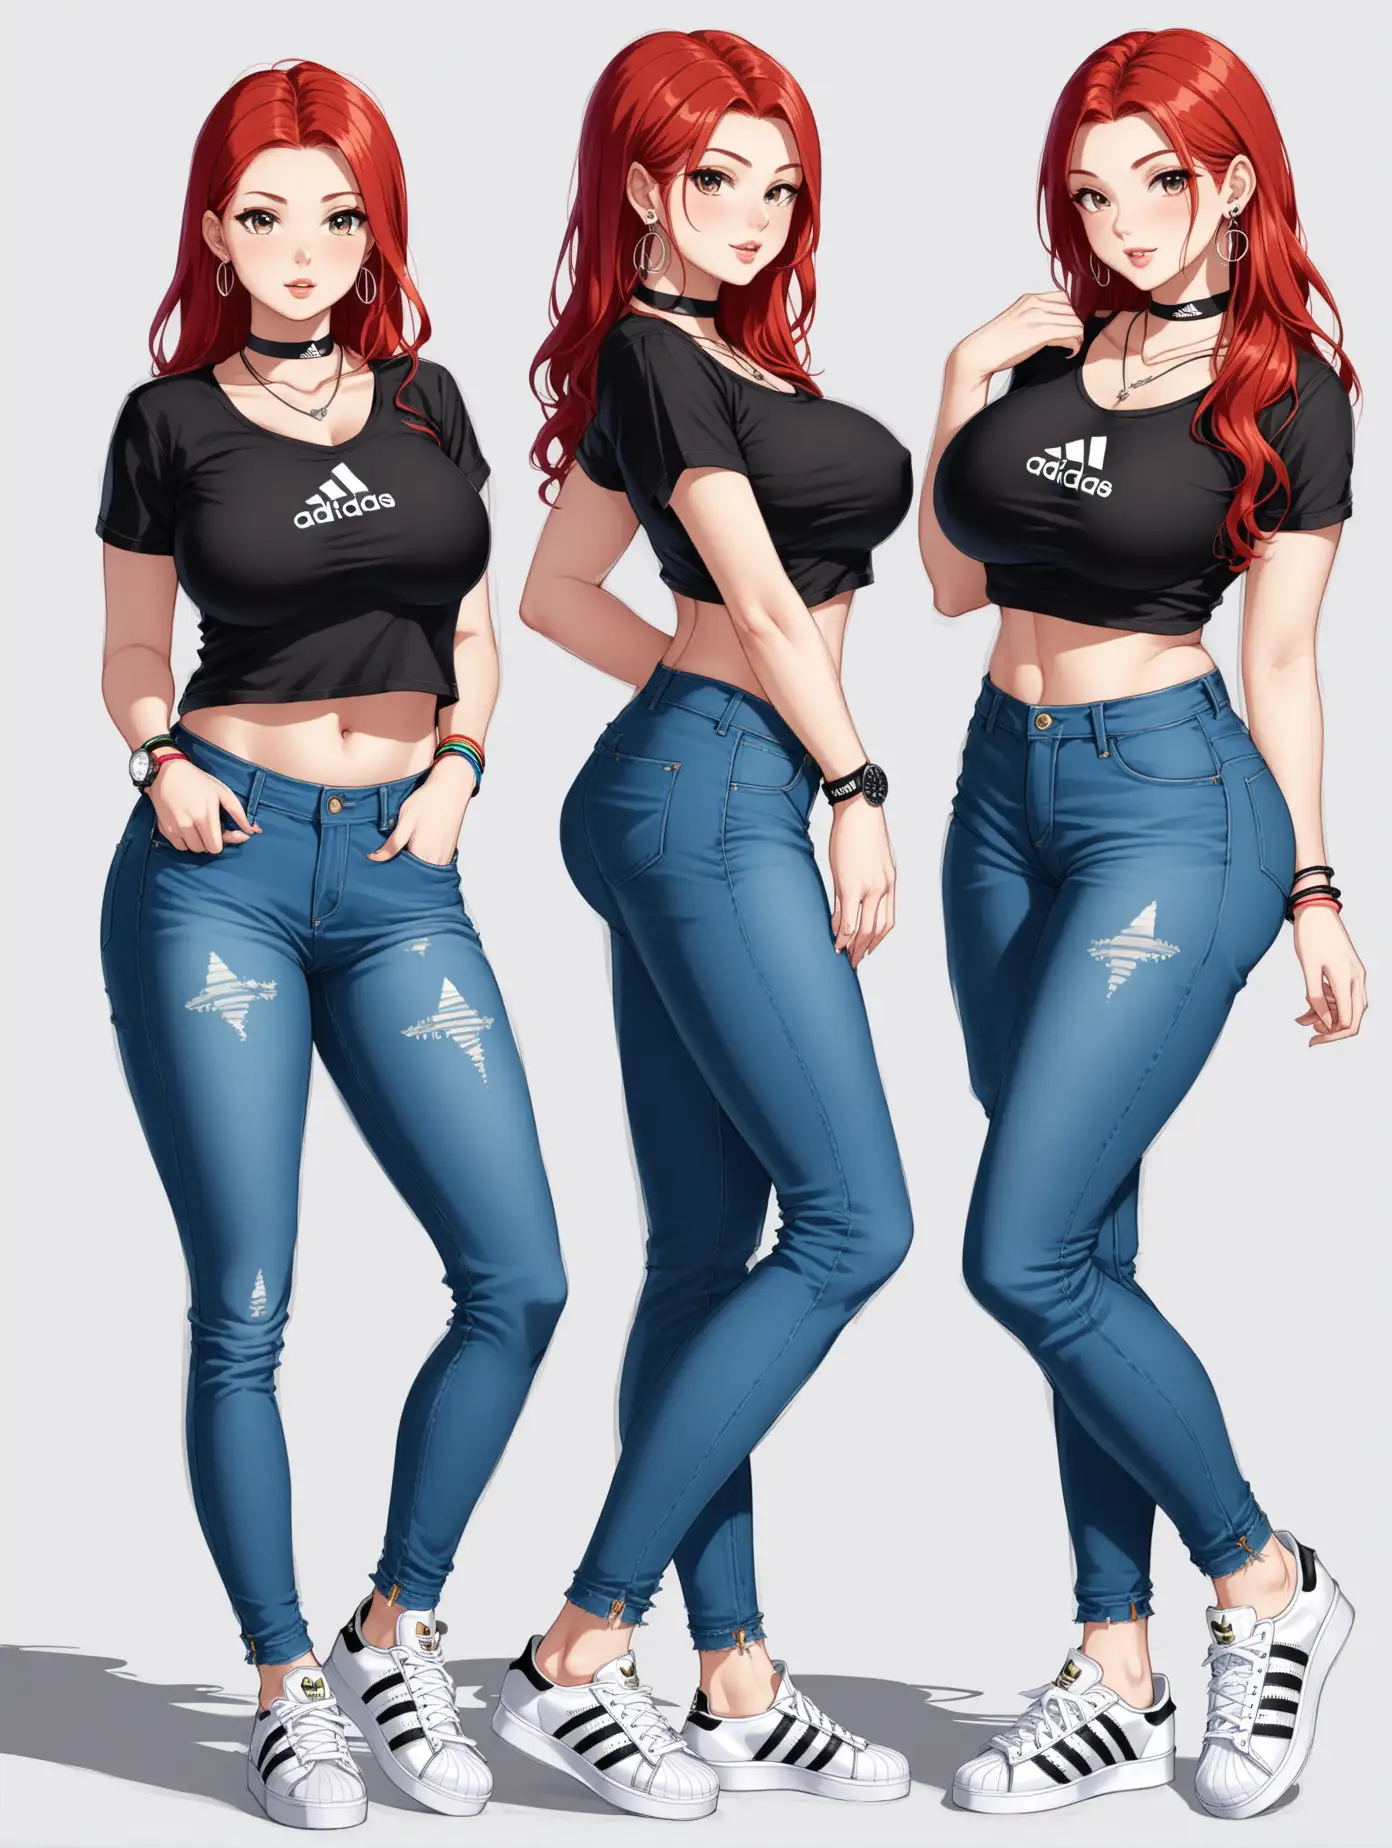 sensual picture of a hot girl, 2 poses, age 20, tall, redhead, busty, big ass, small feet sizes, wearing shirt, jeans, barefooted in High Platforms Adidas model Nizza black sneakers size small, earrings, choker, necklaces, wristbands, watch, 2 poses